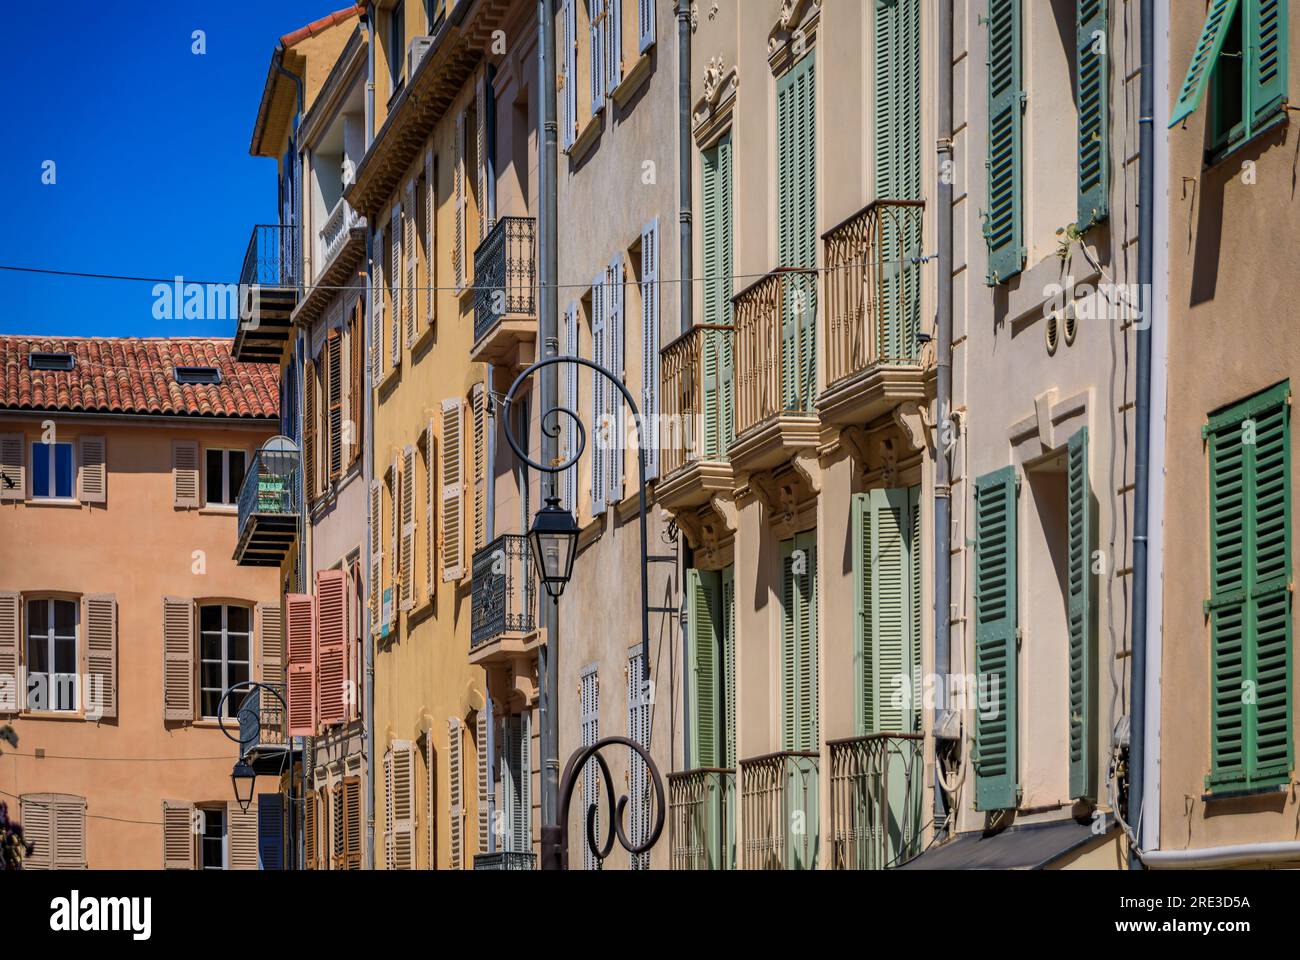 Traditional Mediterranean old houses with wooden shutters on a street near the local provencal market in old town or Vieil Antibes, South of France Stock Photo